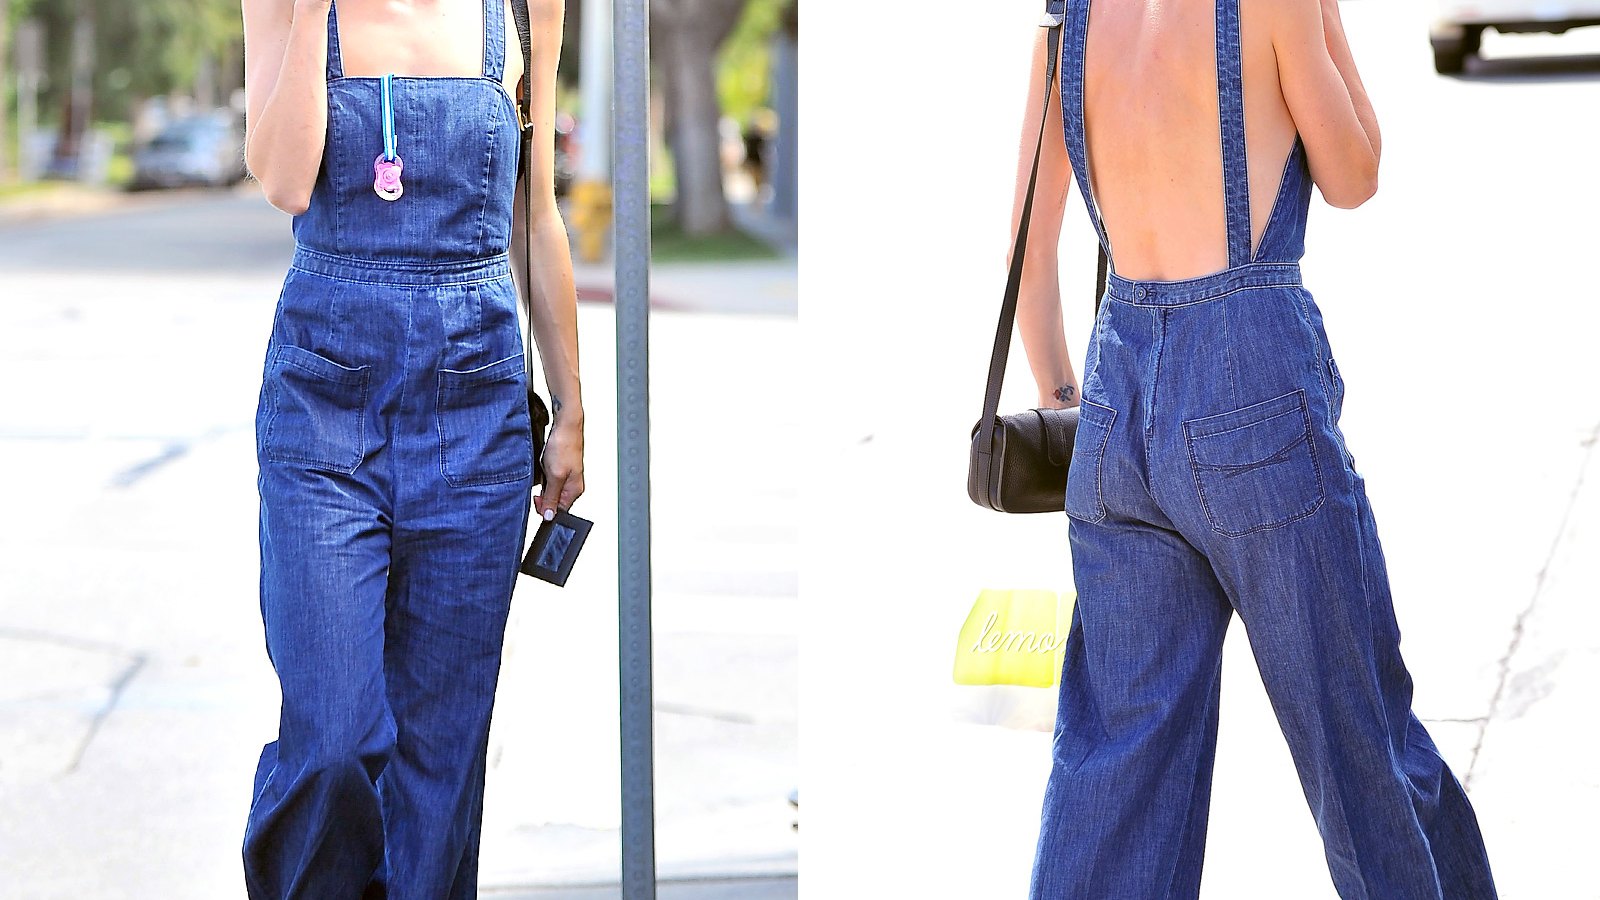 Jaime King Wears Overalls, No Shirt While in L.A.: Picture | Us Weekly